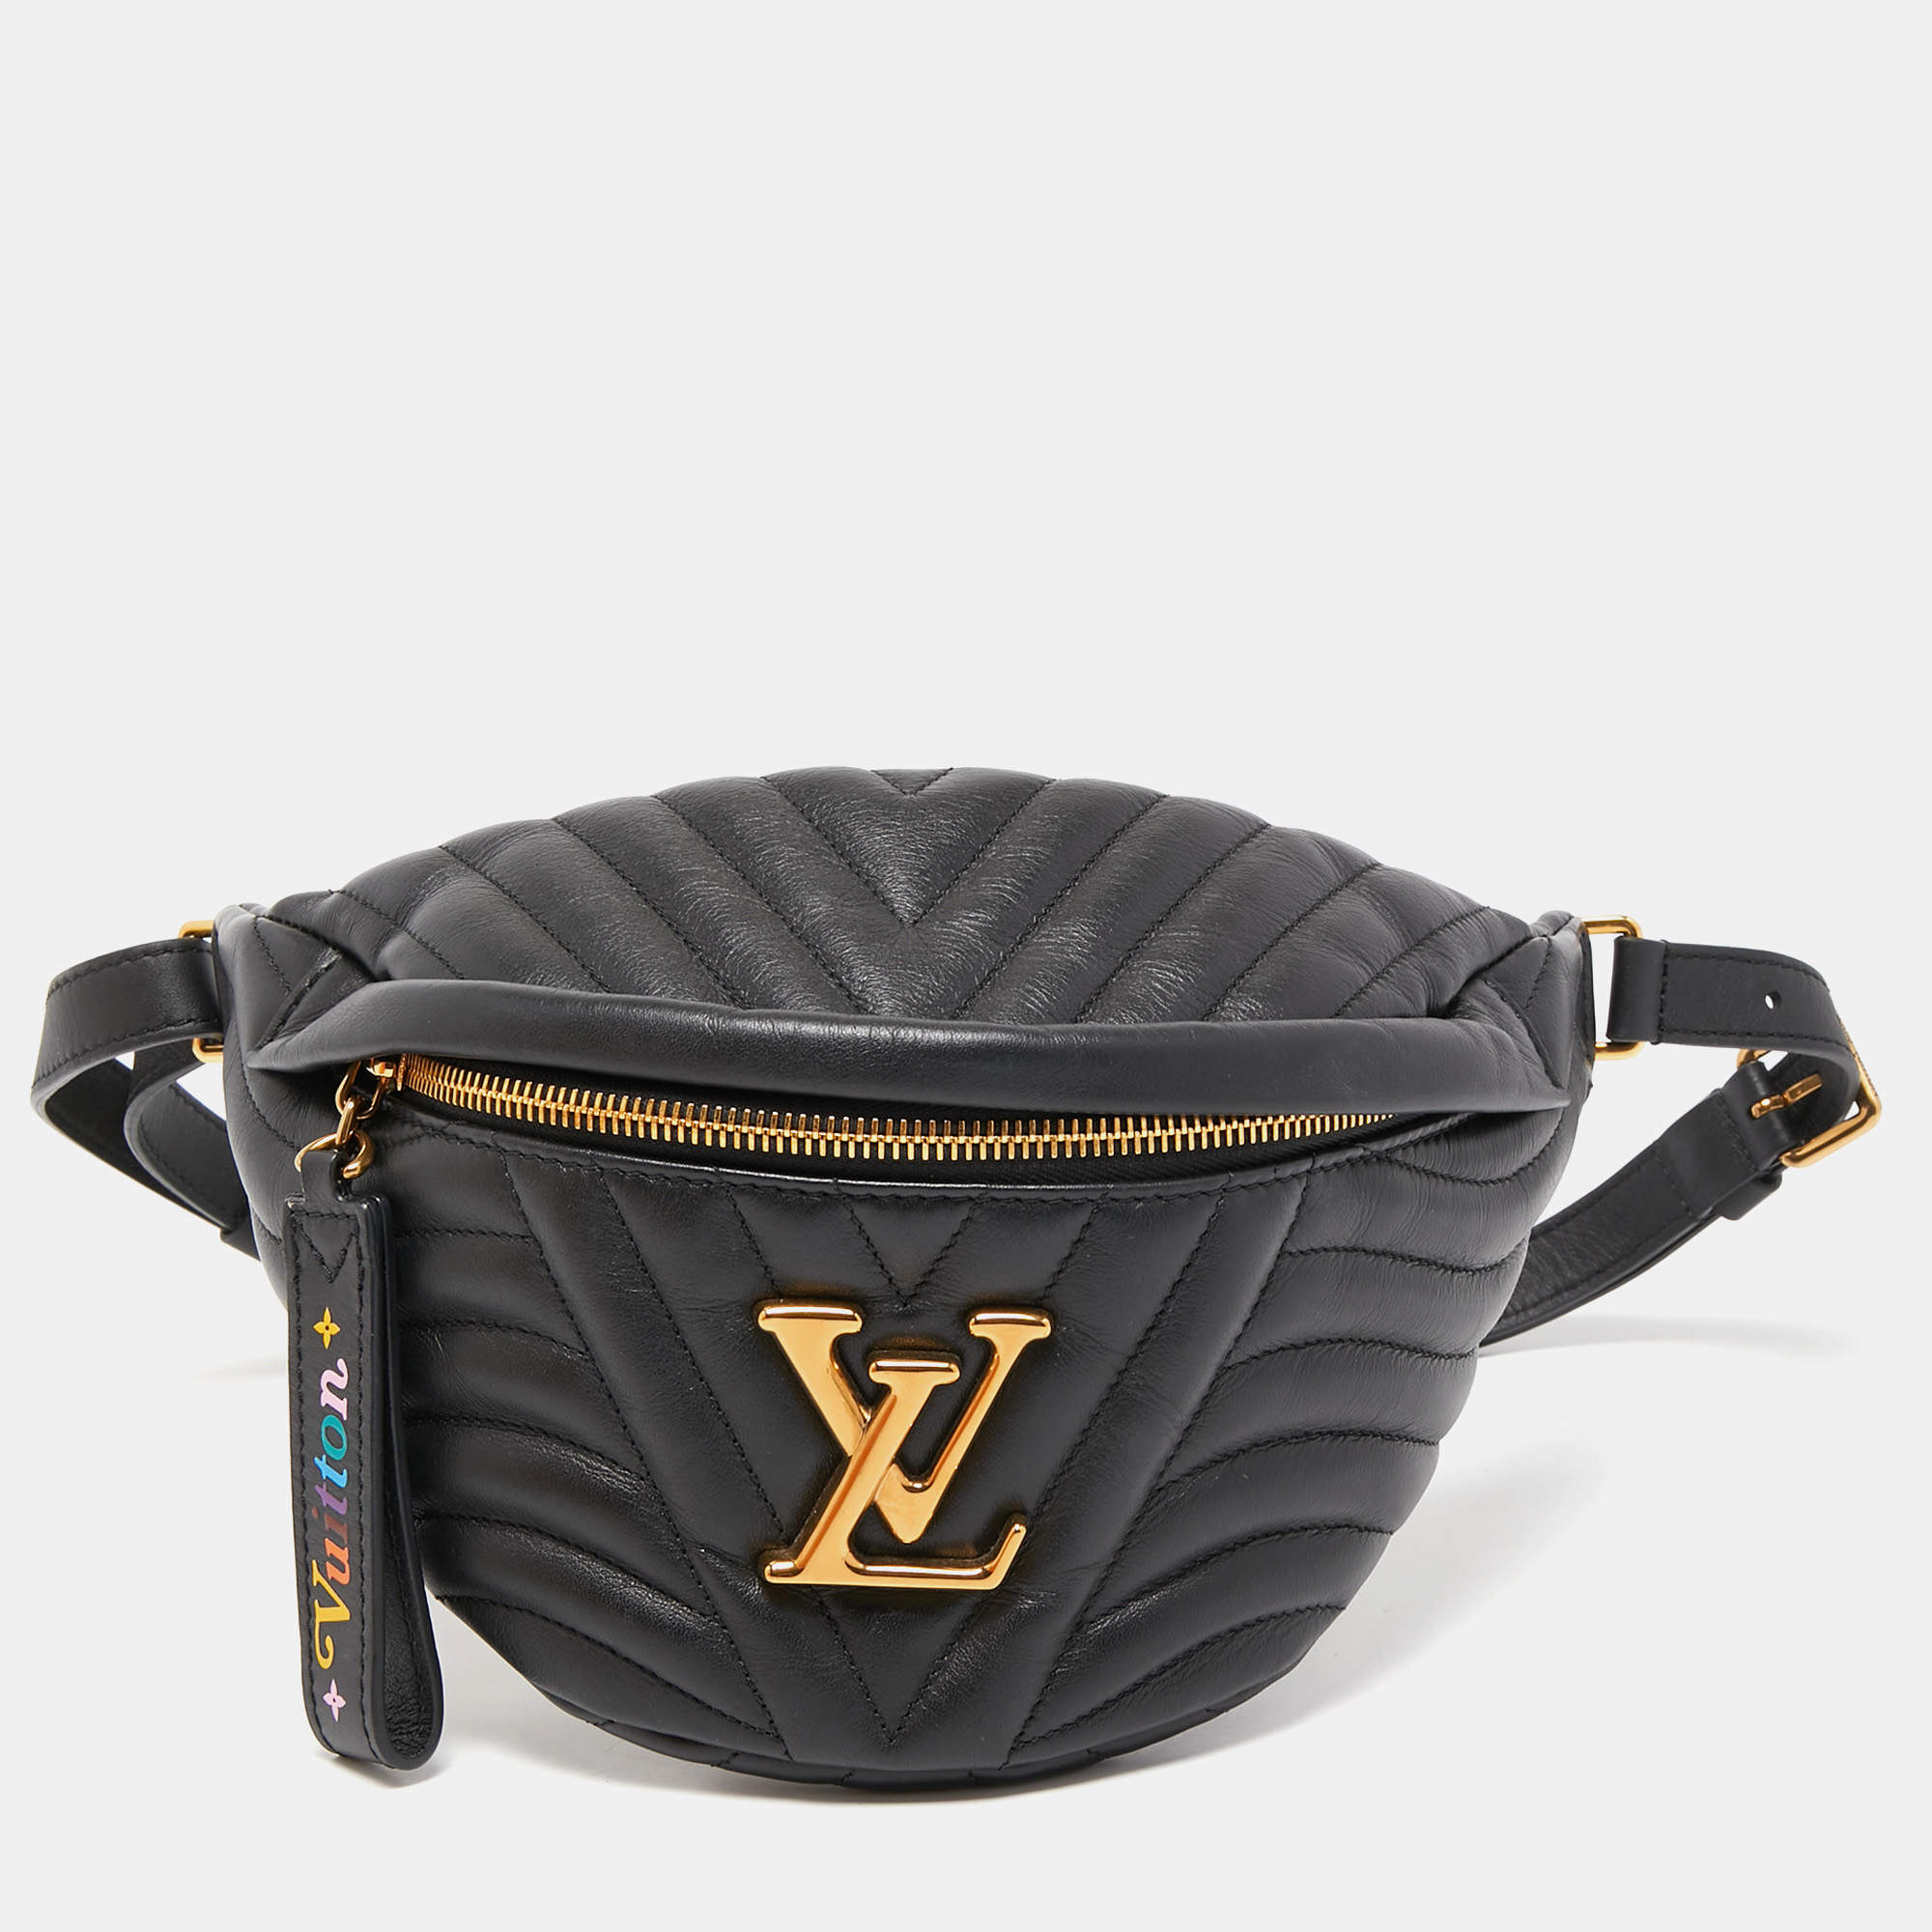 BUMBAG LV Fanny Pack  Rags 2 Riches Apparel